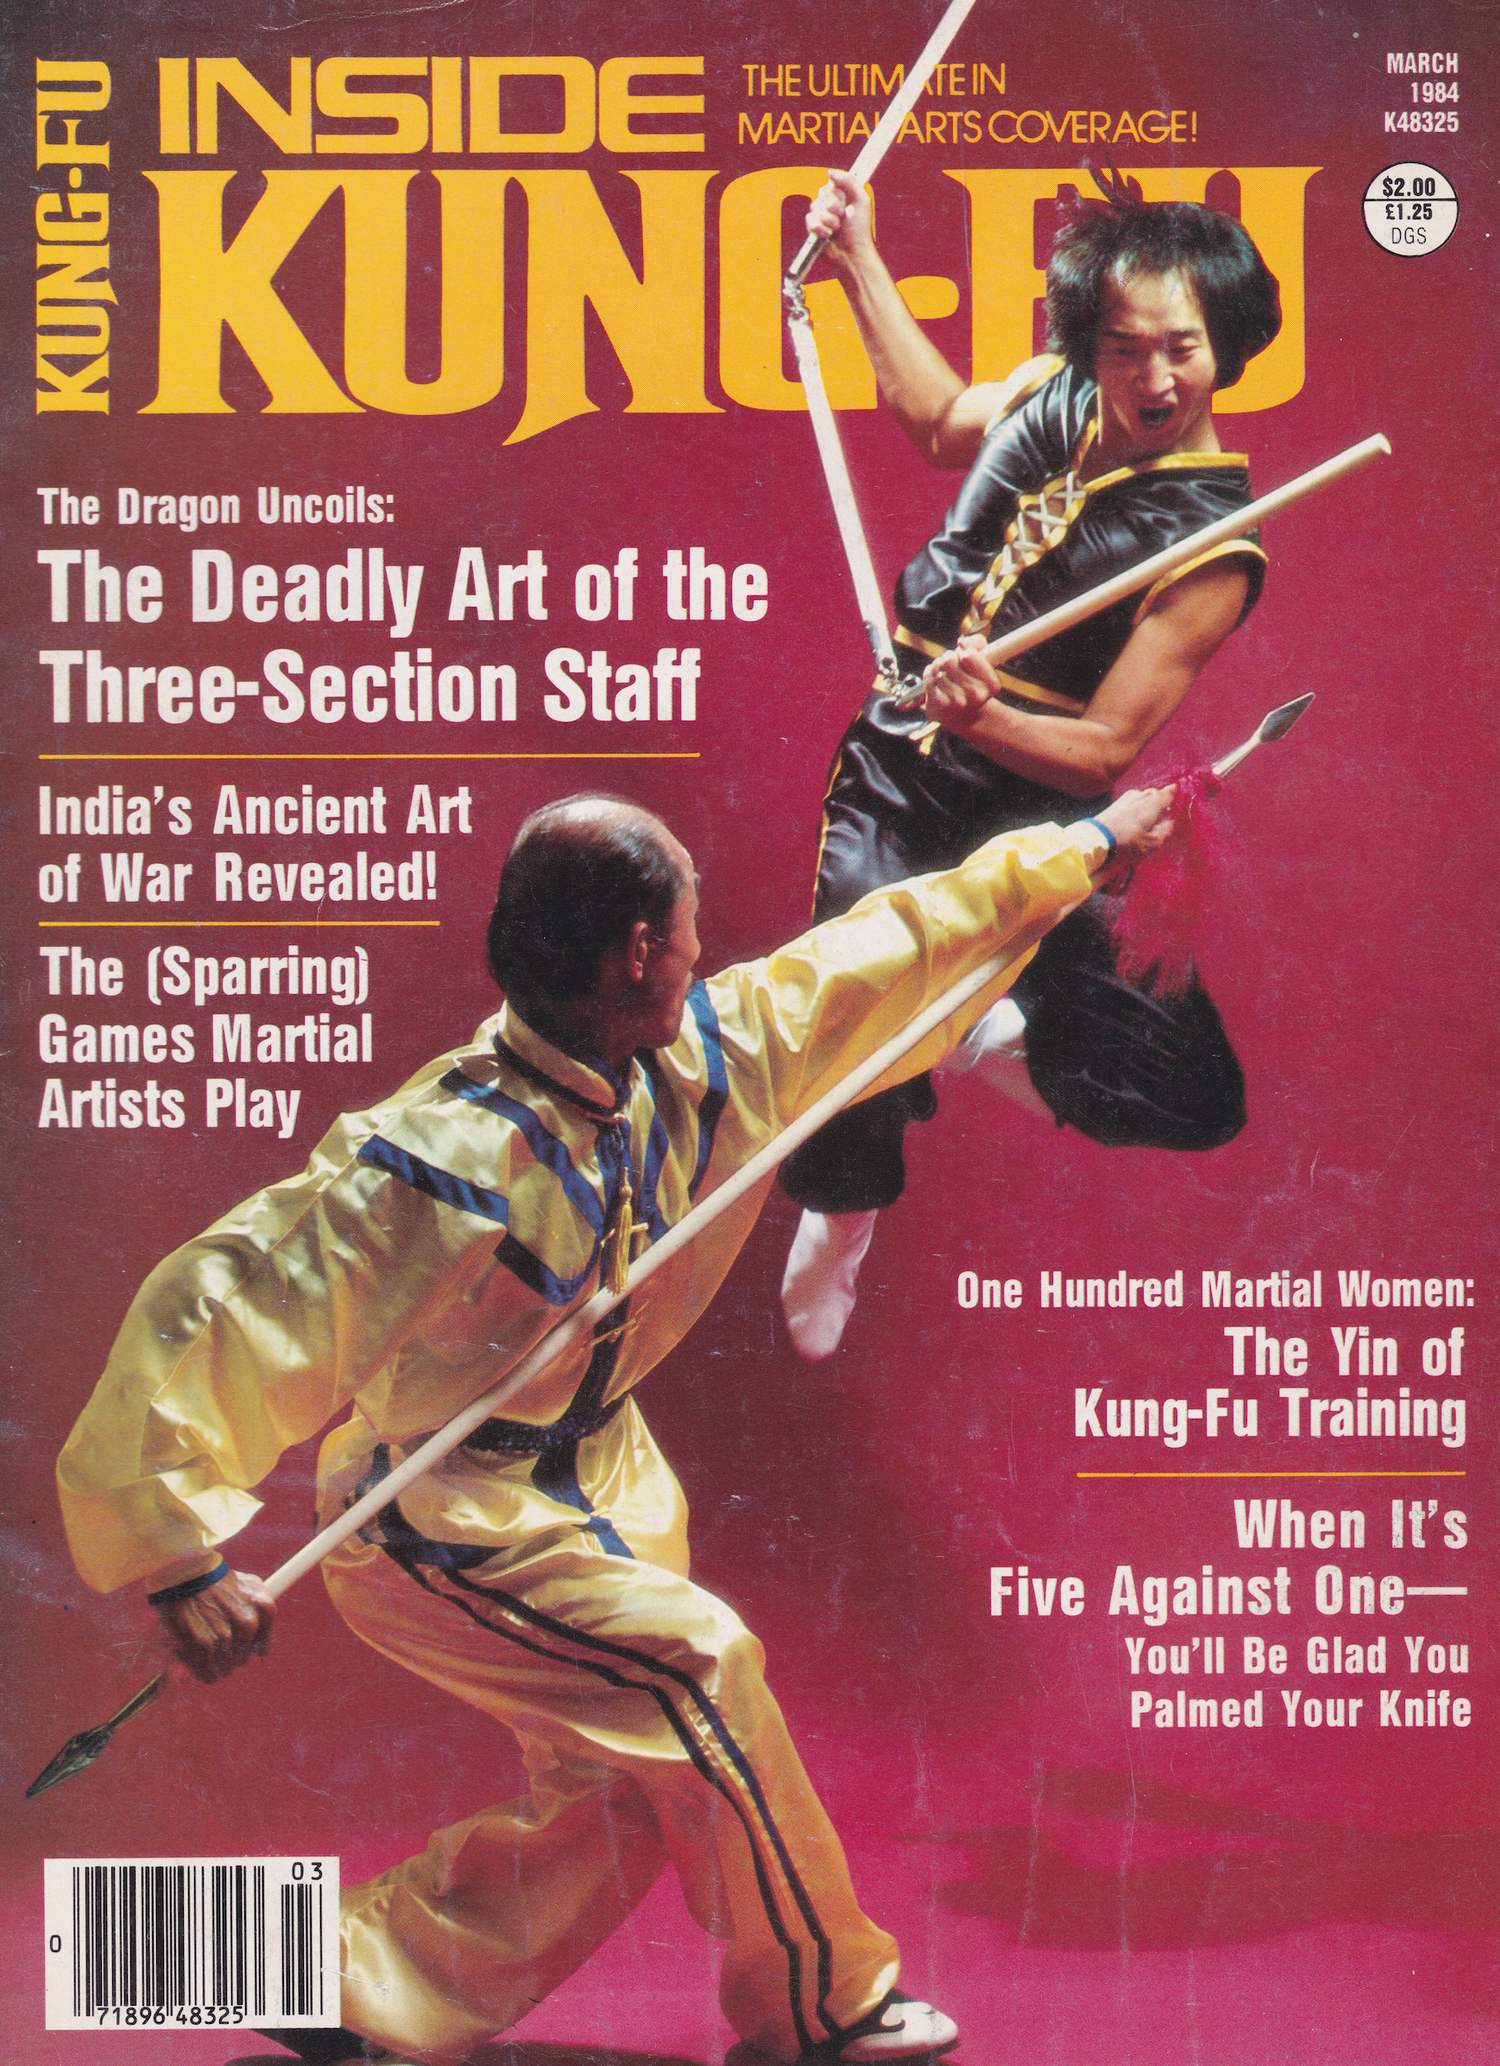 Inside Kung Fu March 1984 Magazine (Preowned)